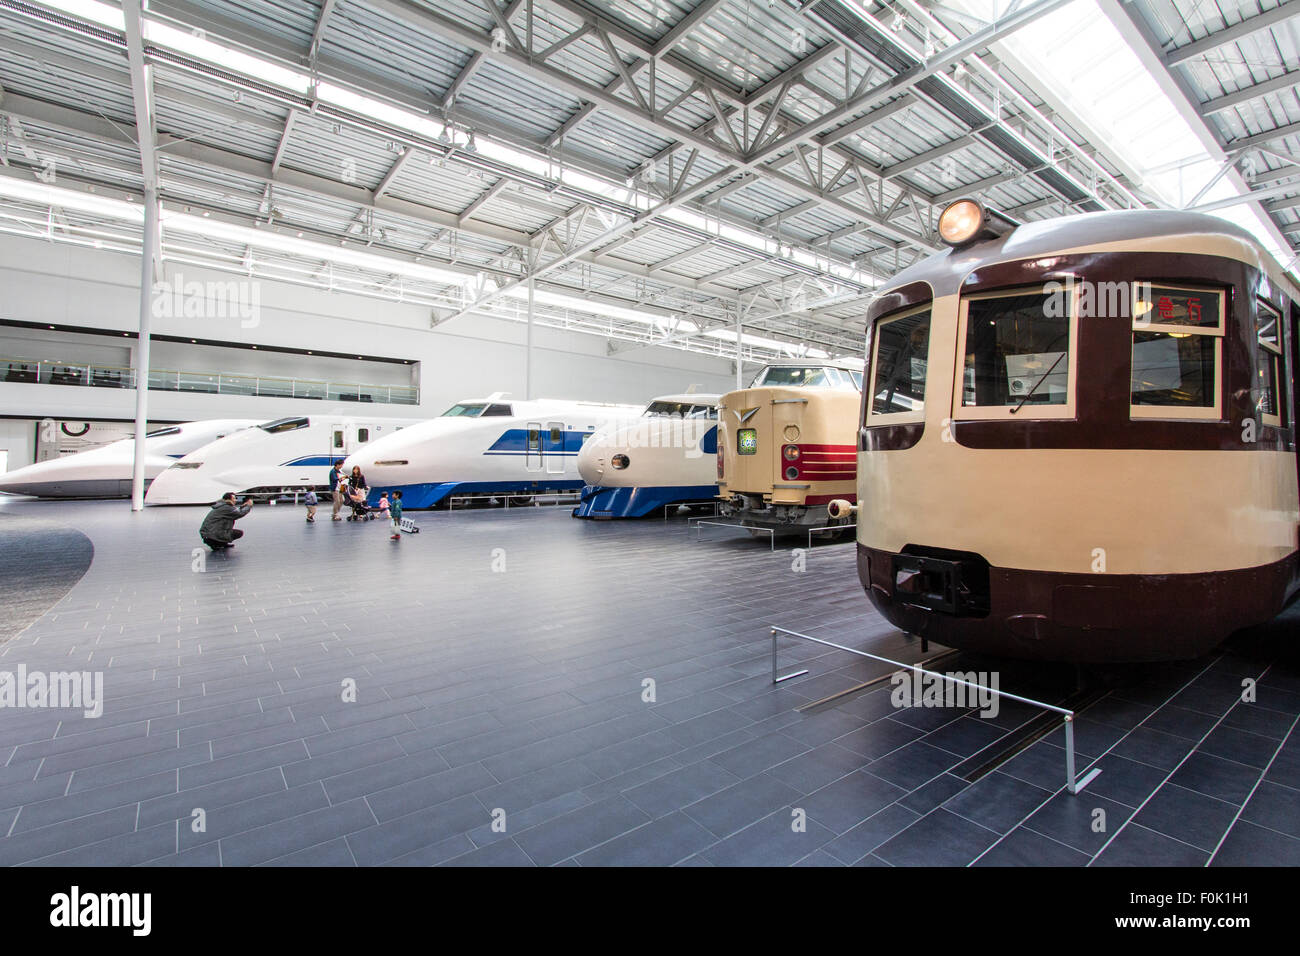 Japan, Nagoya, Railway park. Shinkansen Museum. Nearest is a Class Moha 52 electric railcar and beyond, an express and four different bullet trains. Stock Photo